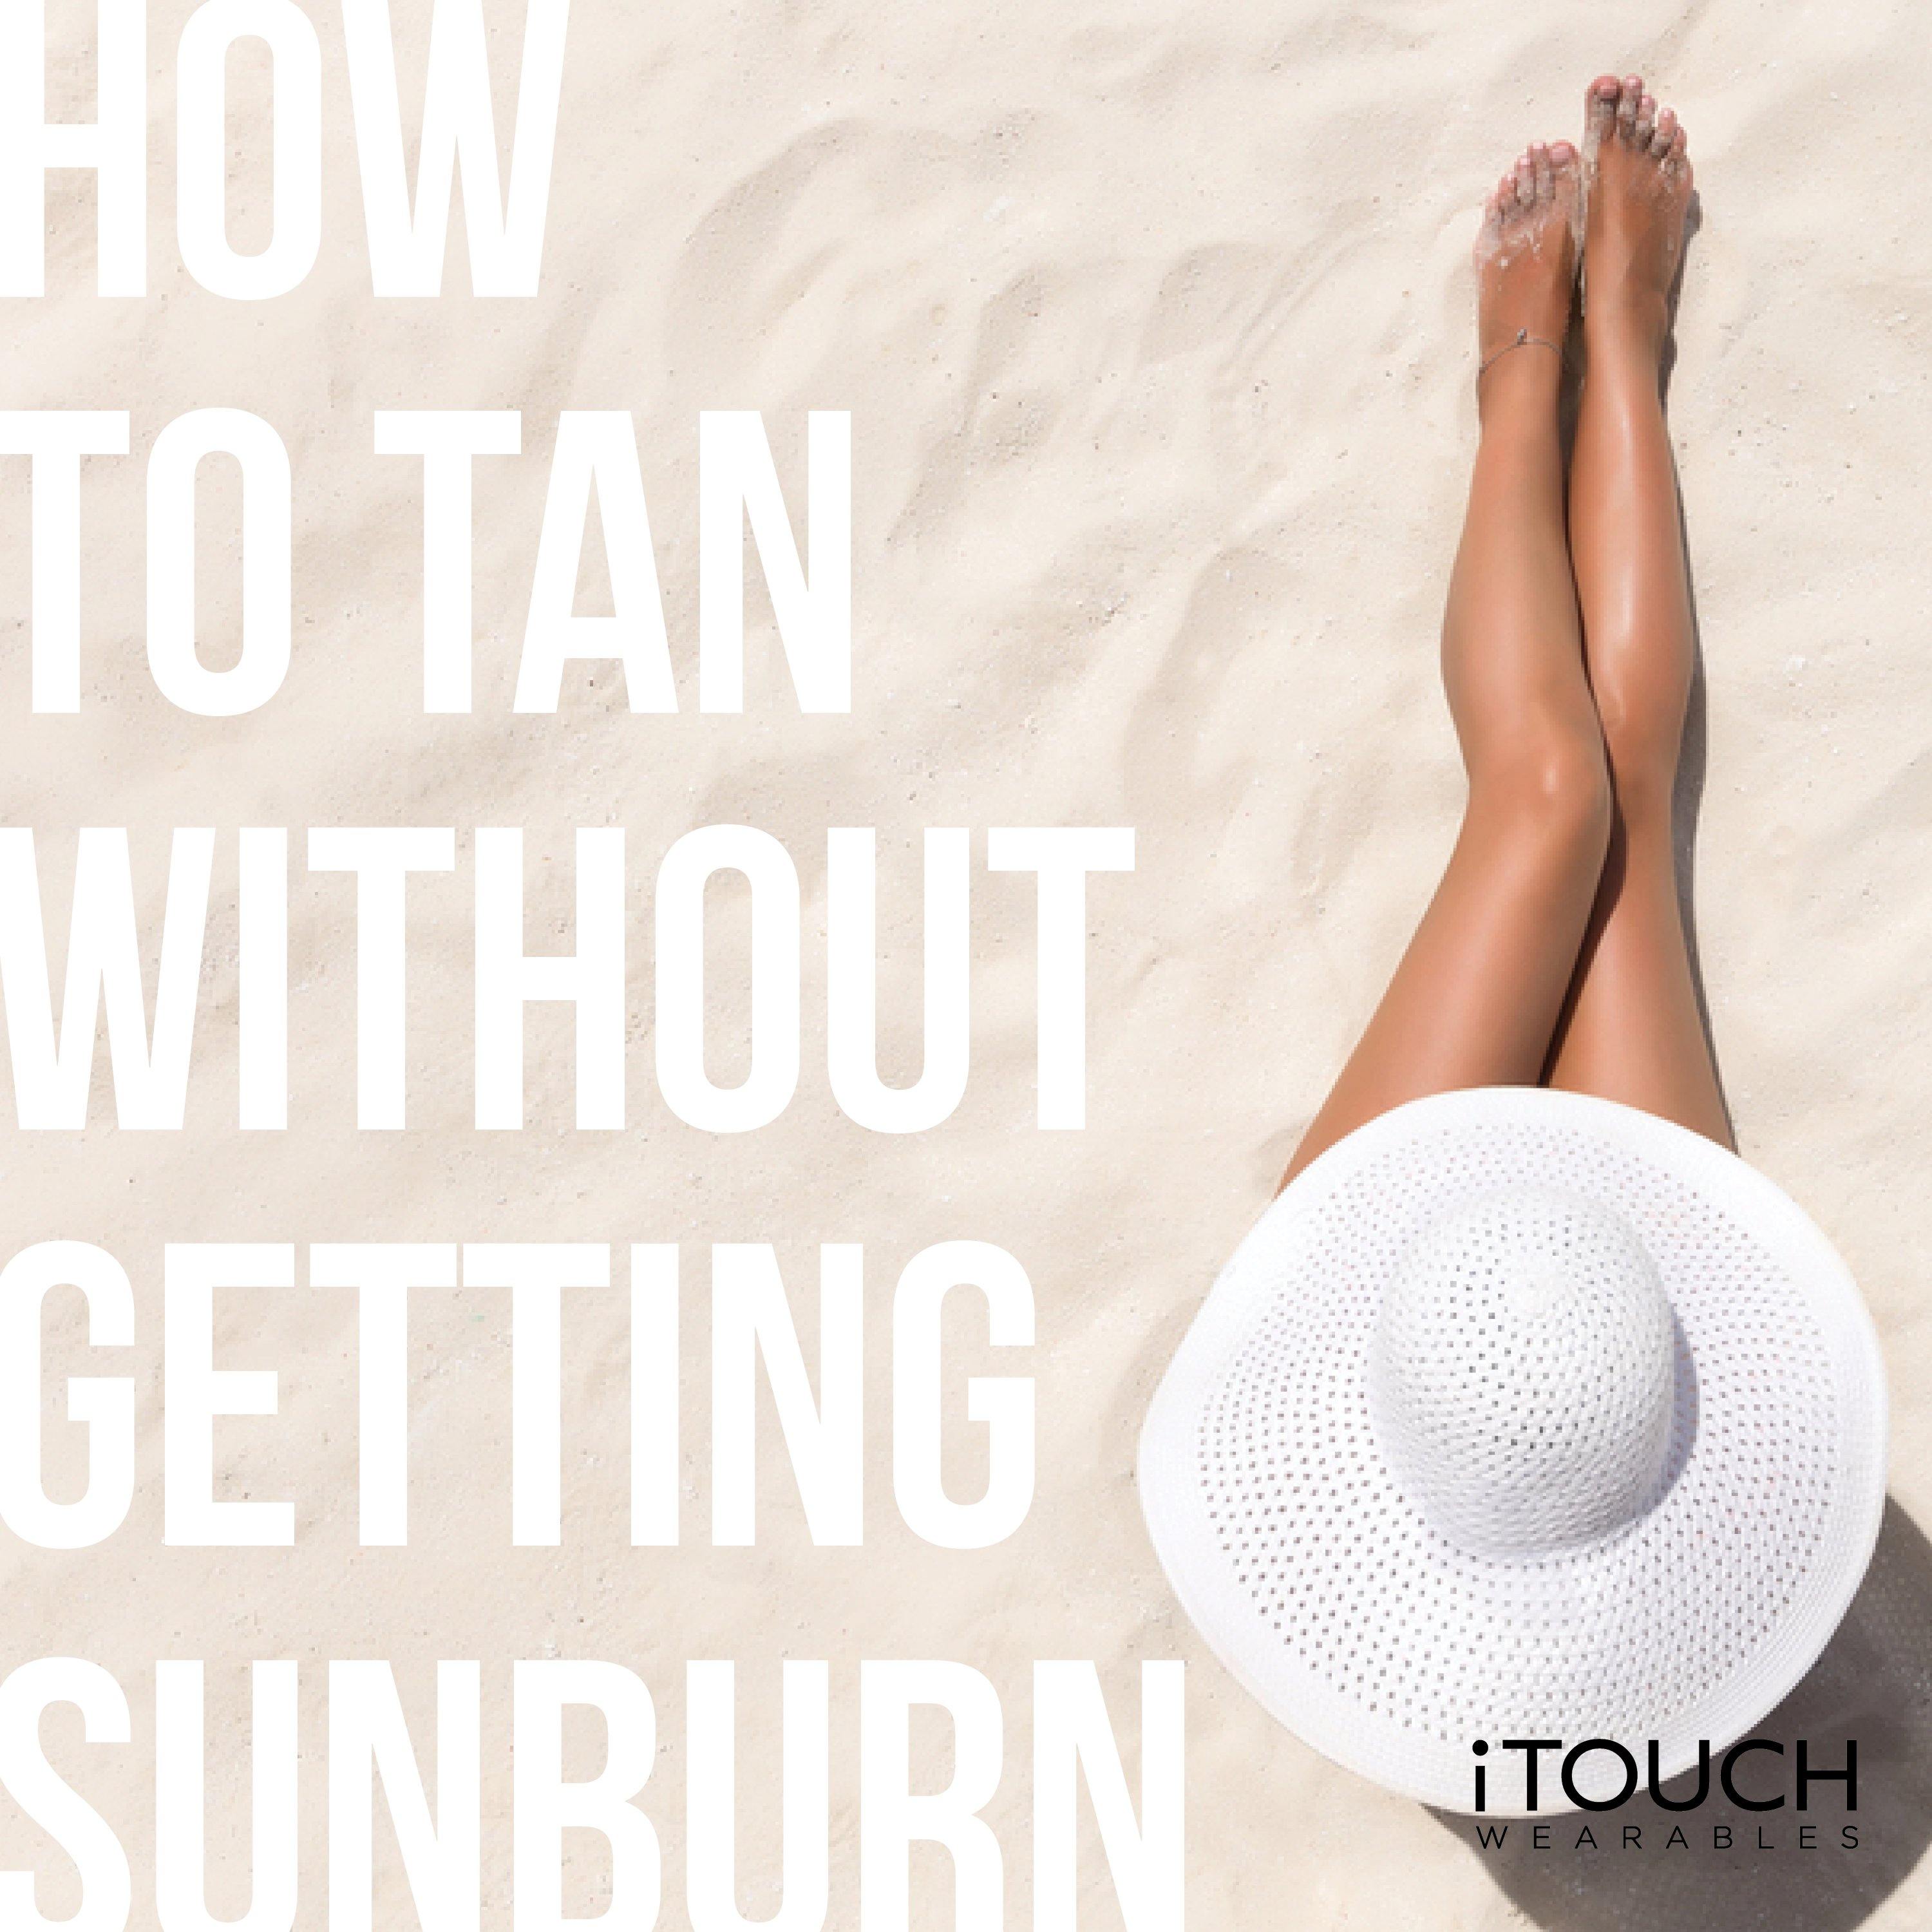 How To Tan Without Getting Sunburn - iTOUCH Wearables